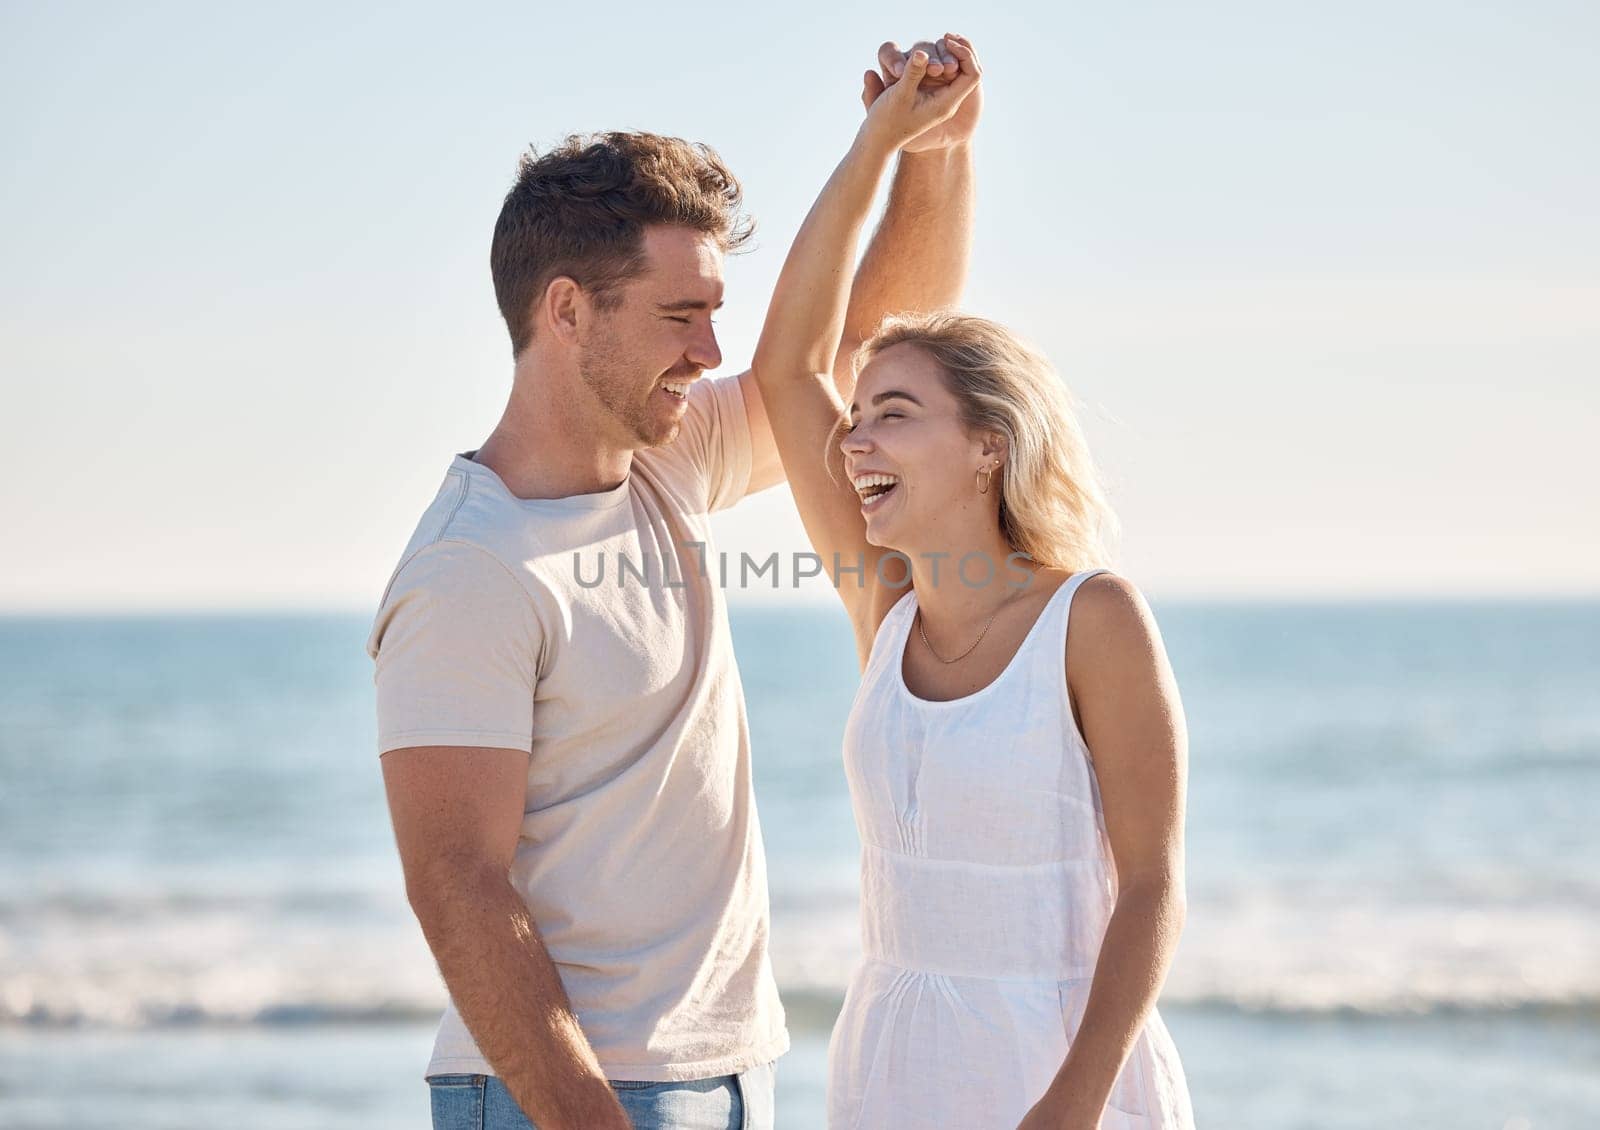 Beach, love and dance with a young couple in nature, happy together during a date or summer vacation. Smile, travel and romance with a man and woman dancing by the sea or ocean while bonding by YuriArcurs